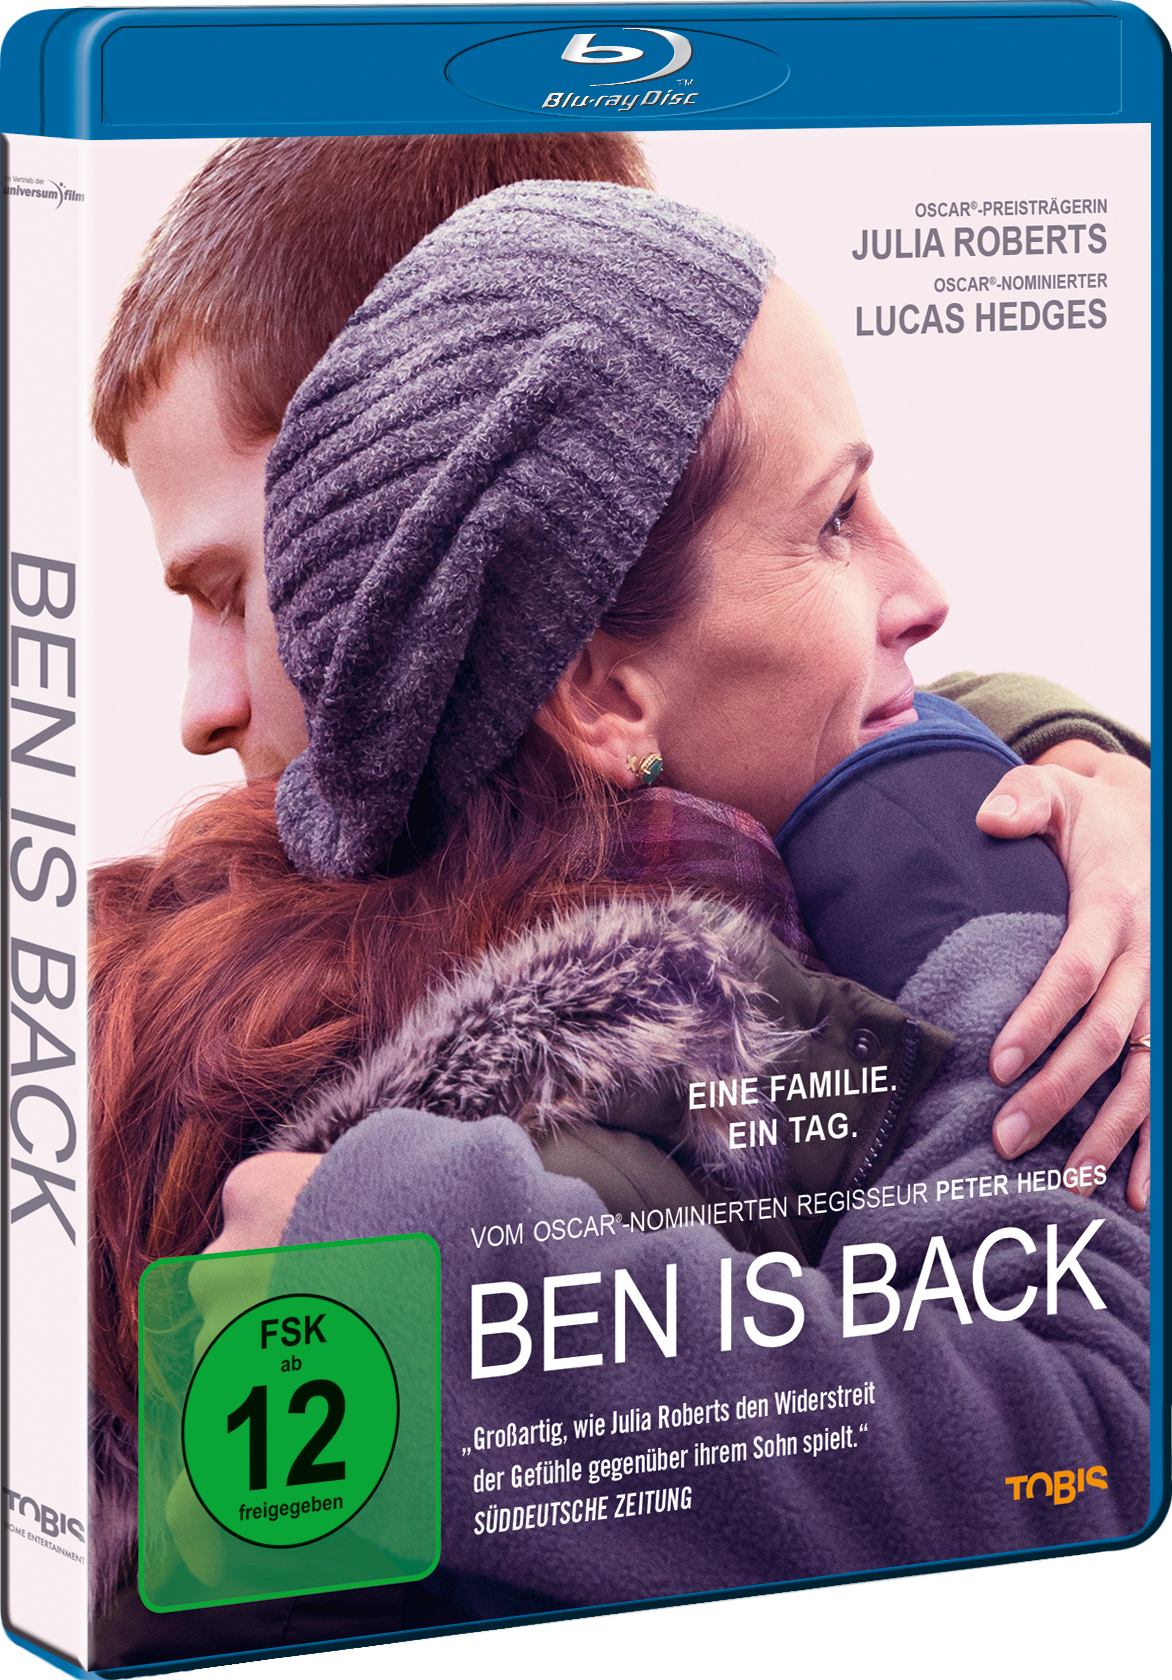 Blu-ray is Ben Back